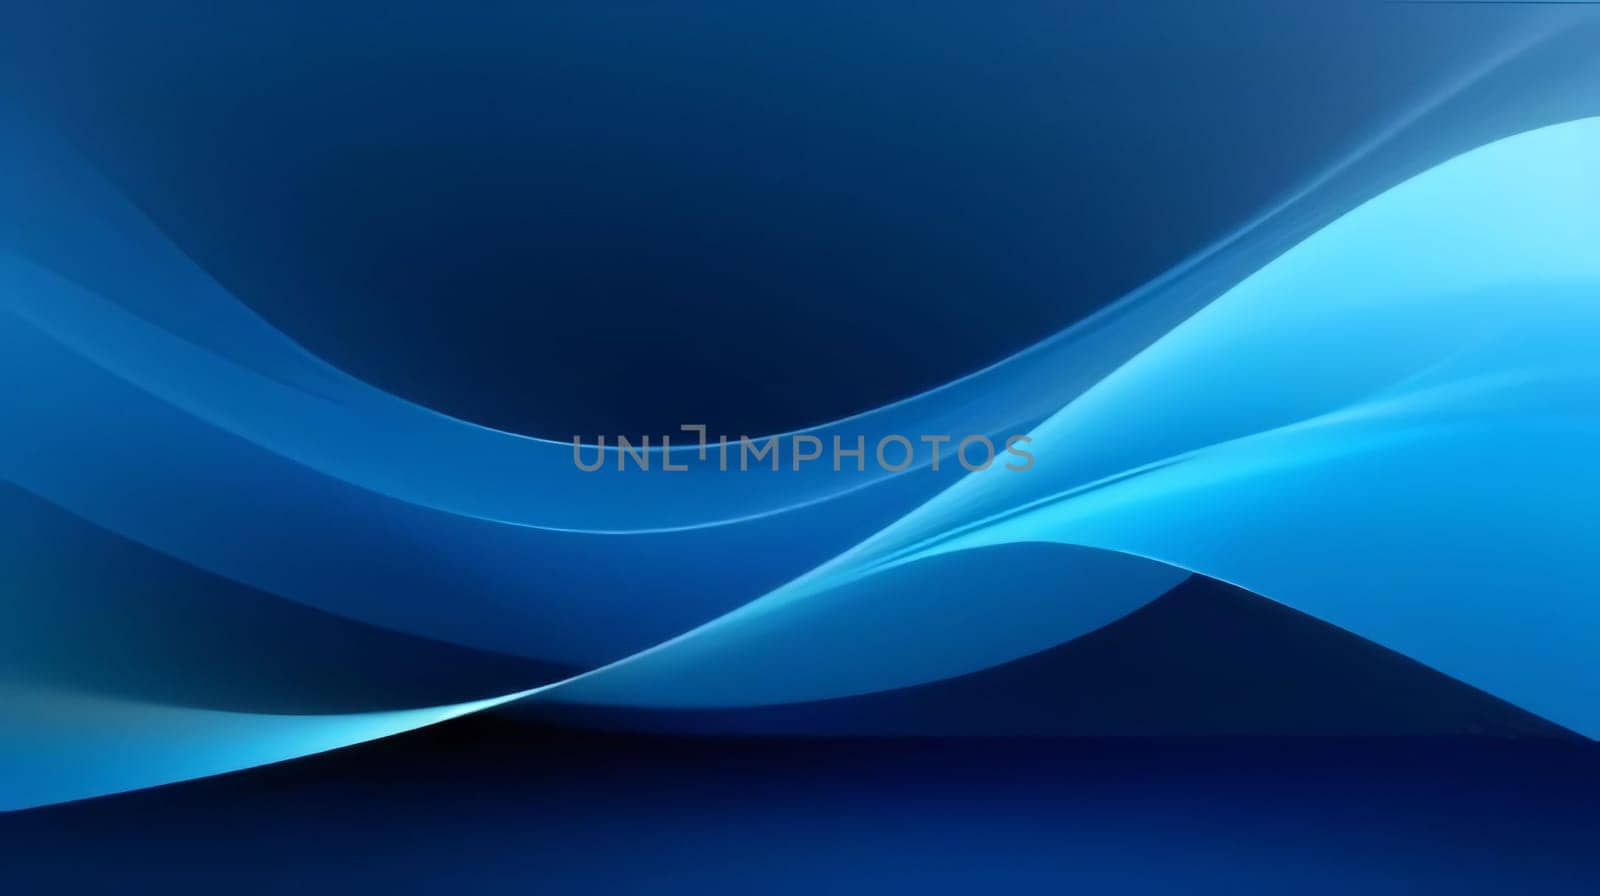 Abstract background design: abstract blue background with smooth lines and space for text or image